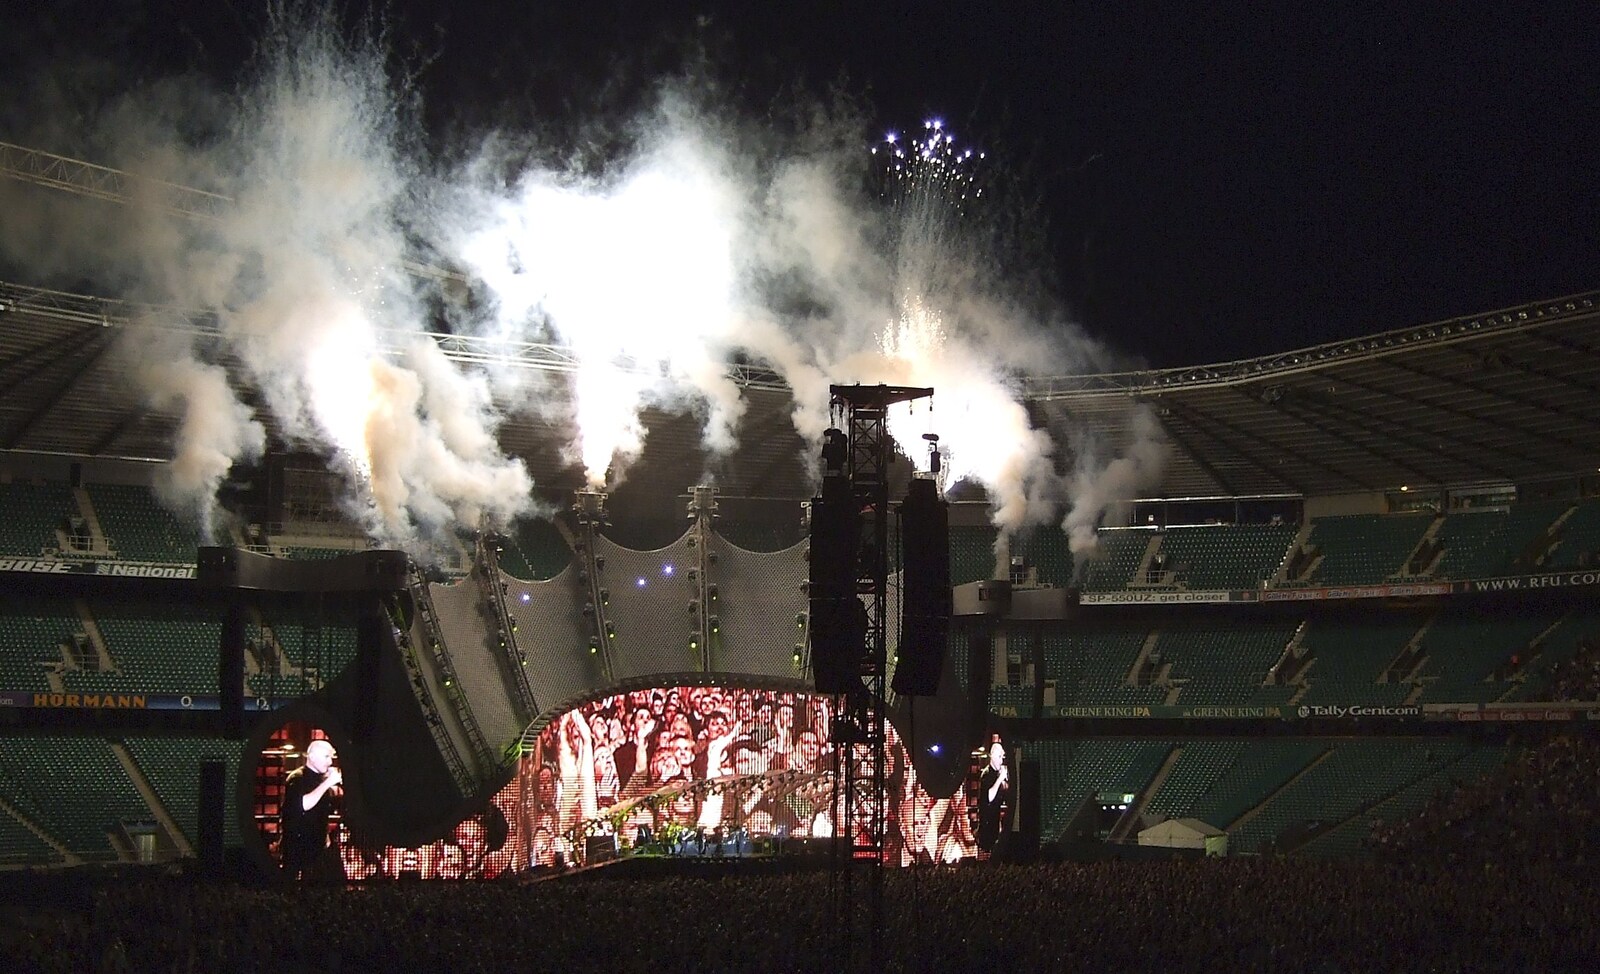 Genesis Live at Twickenham, and Music on Parker's Piece, London and Cambridge - 8th July 2007: Pyrotechnics at the end of the main set